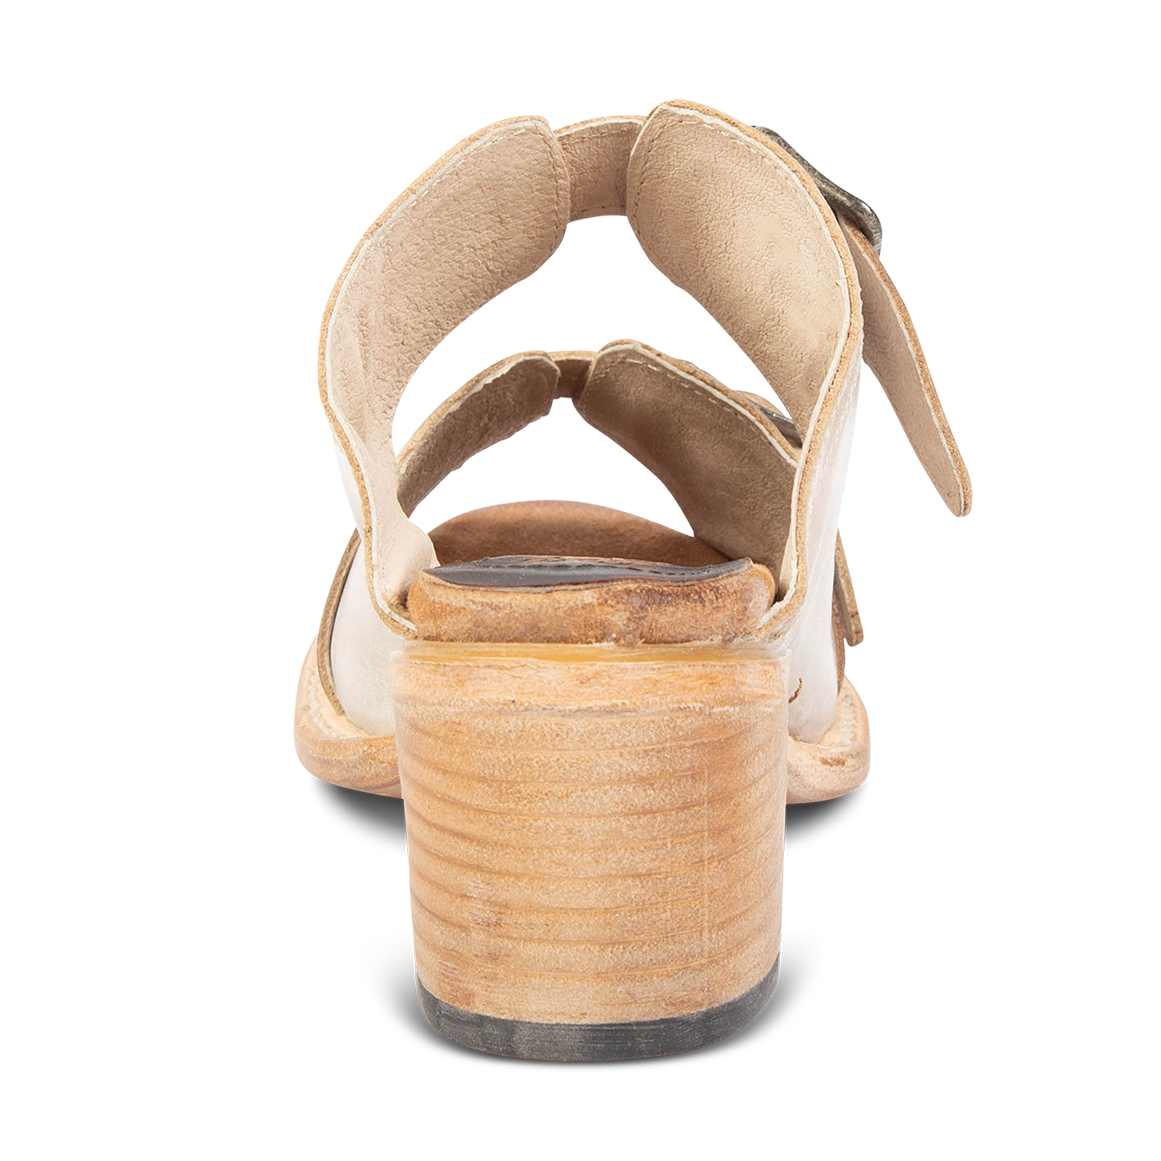 Back view showing leather buckle strap detailing FREEBIRD women's Caprice beige sandal